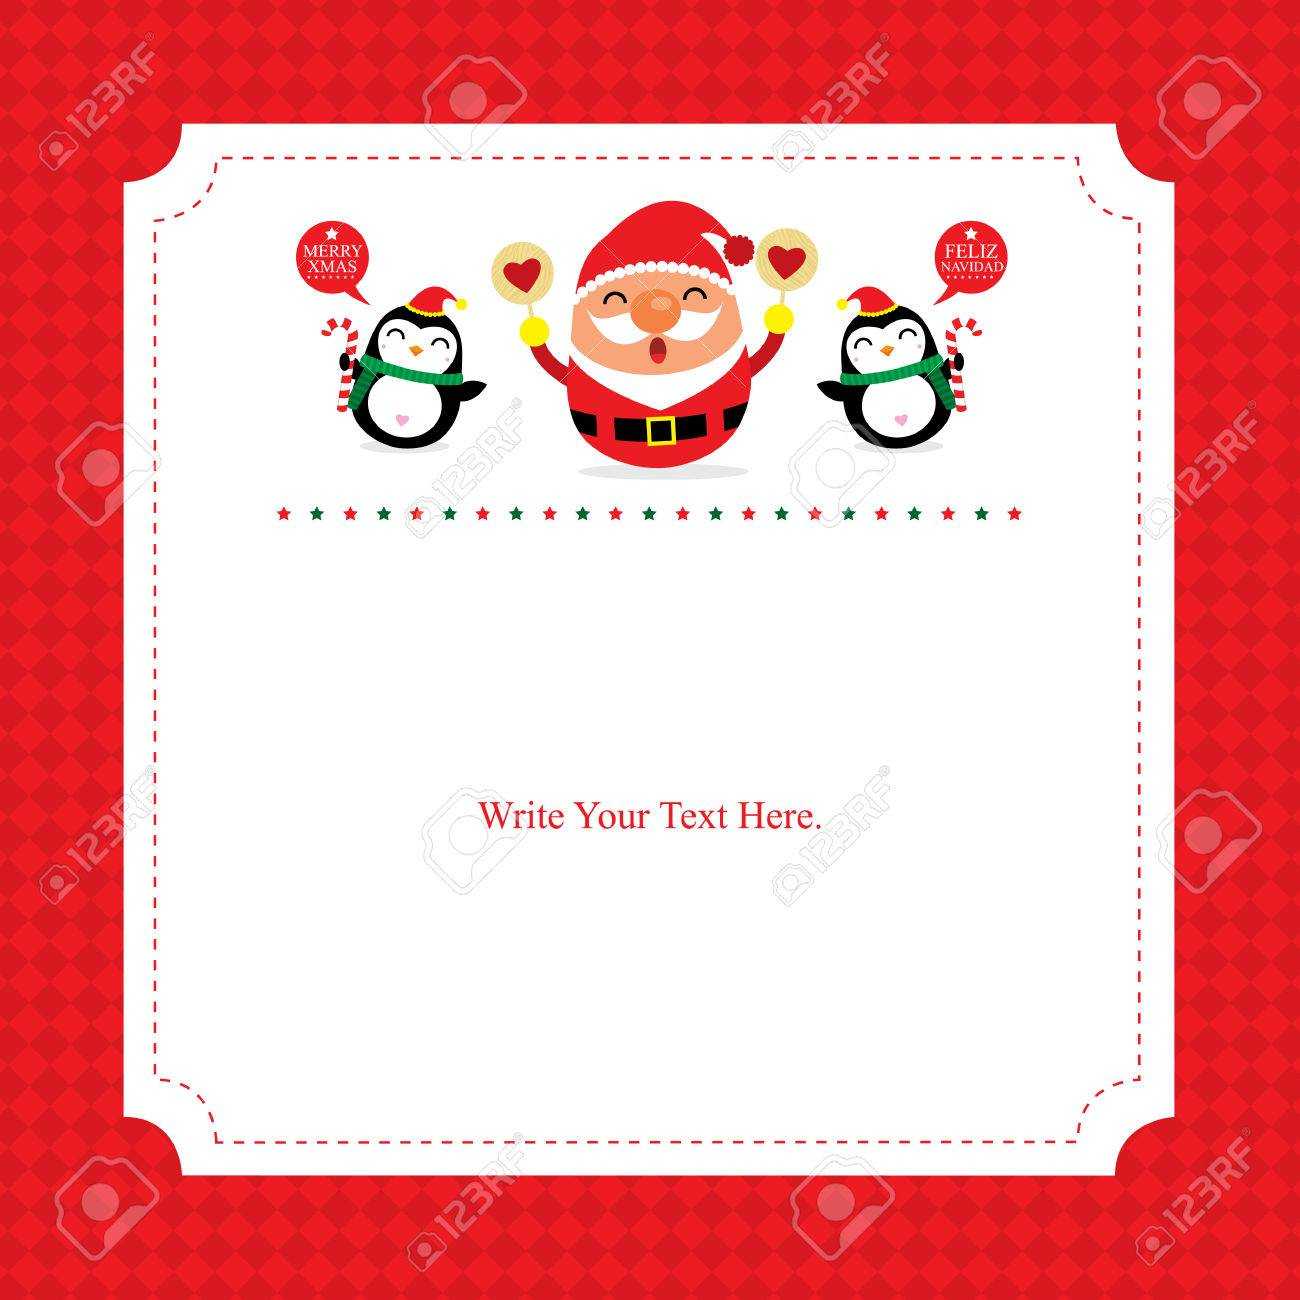 Christmas Card Template Santa Claus With Happy Holidays Card Template